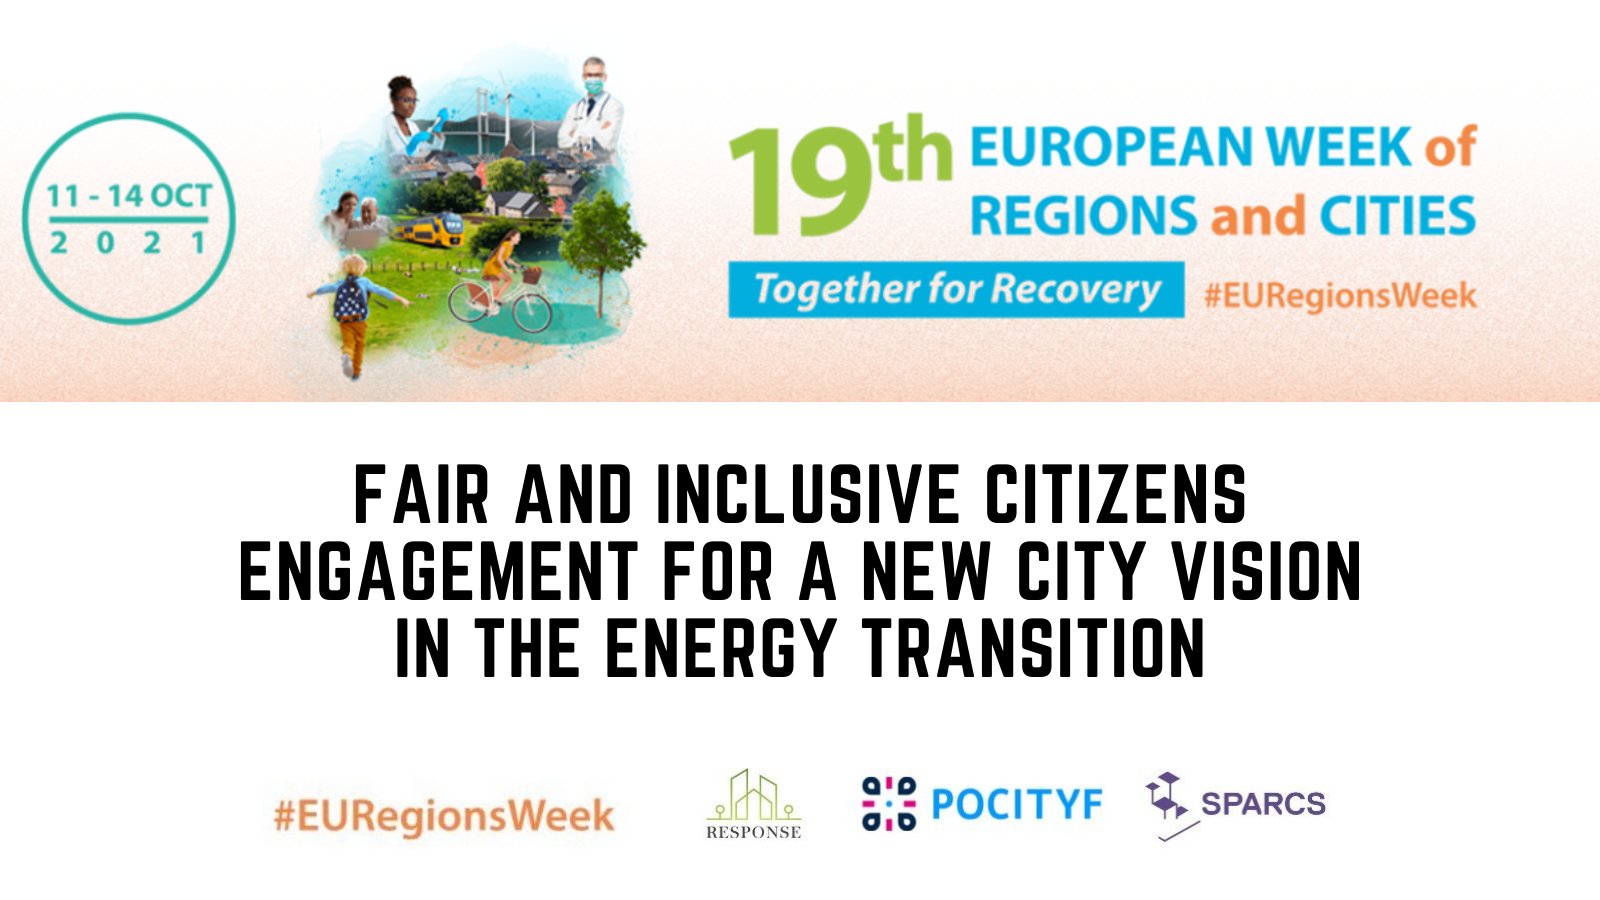 Fair and inclusive citizen engagement for a new city vision in the energy transition